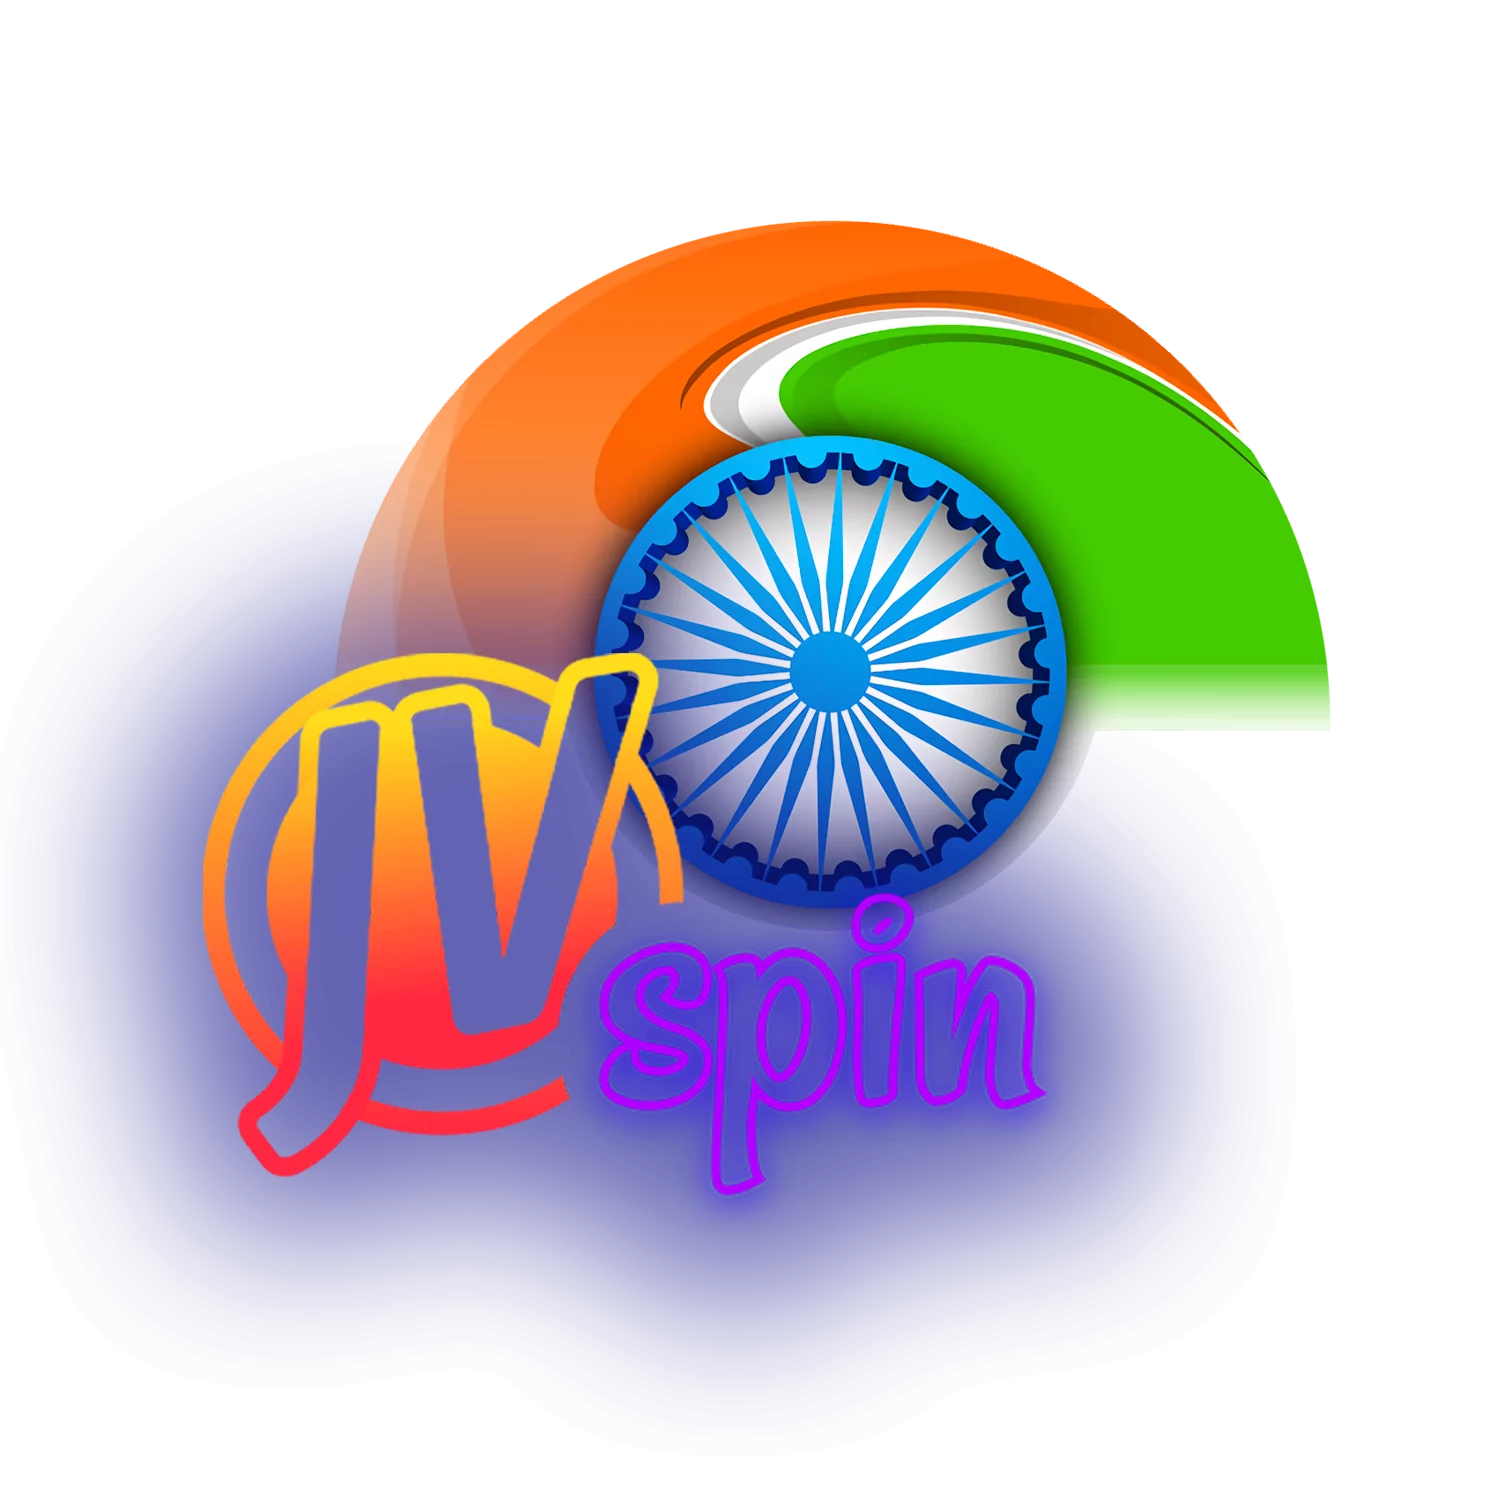 JVSpin is a new trustworthy online casino site working in India.